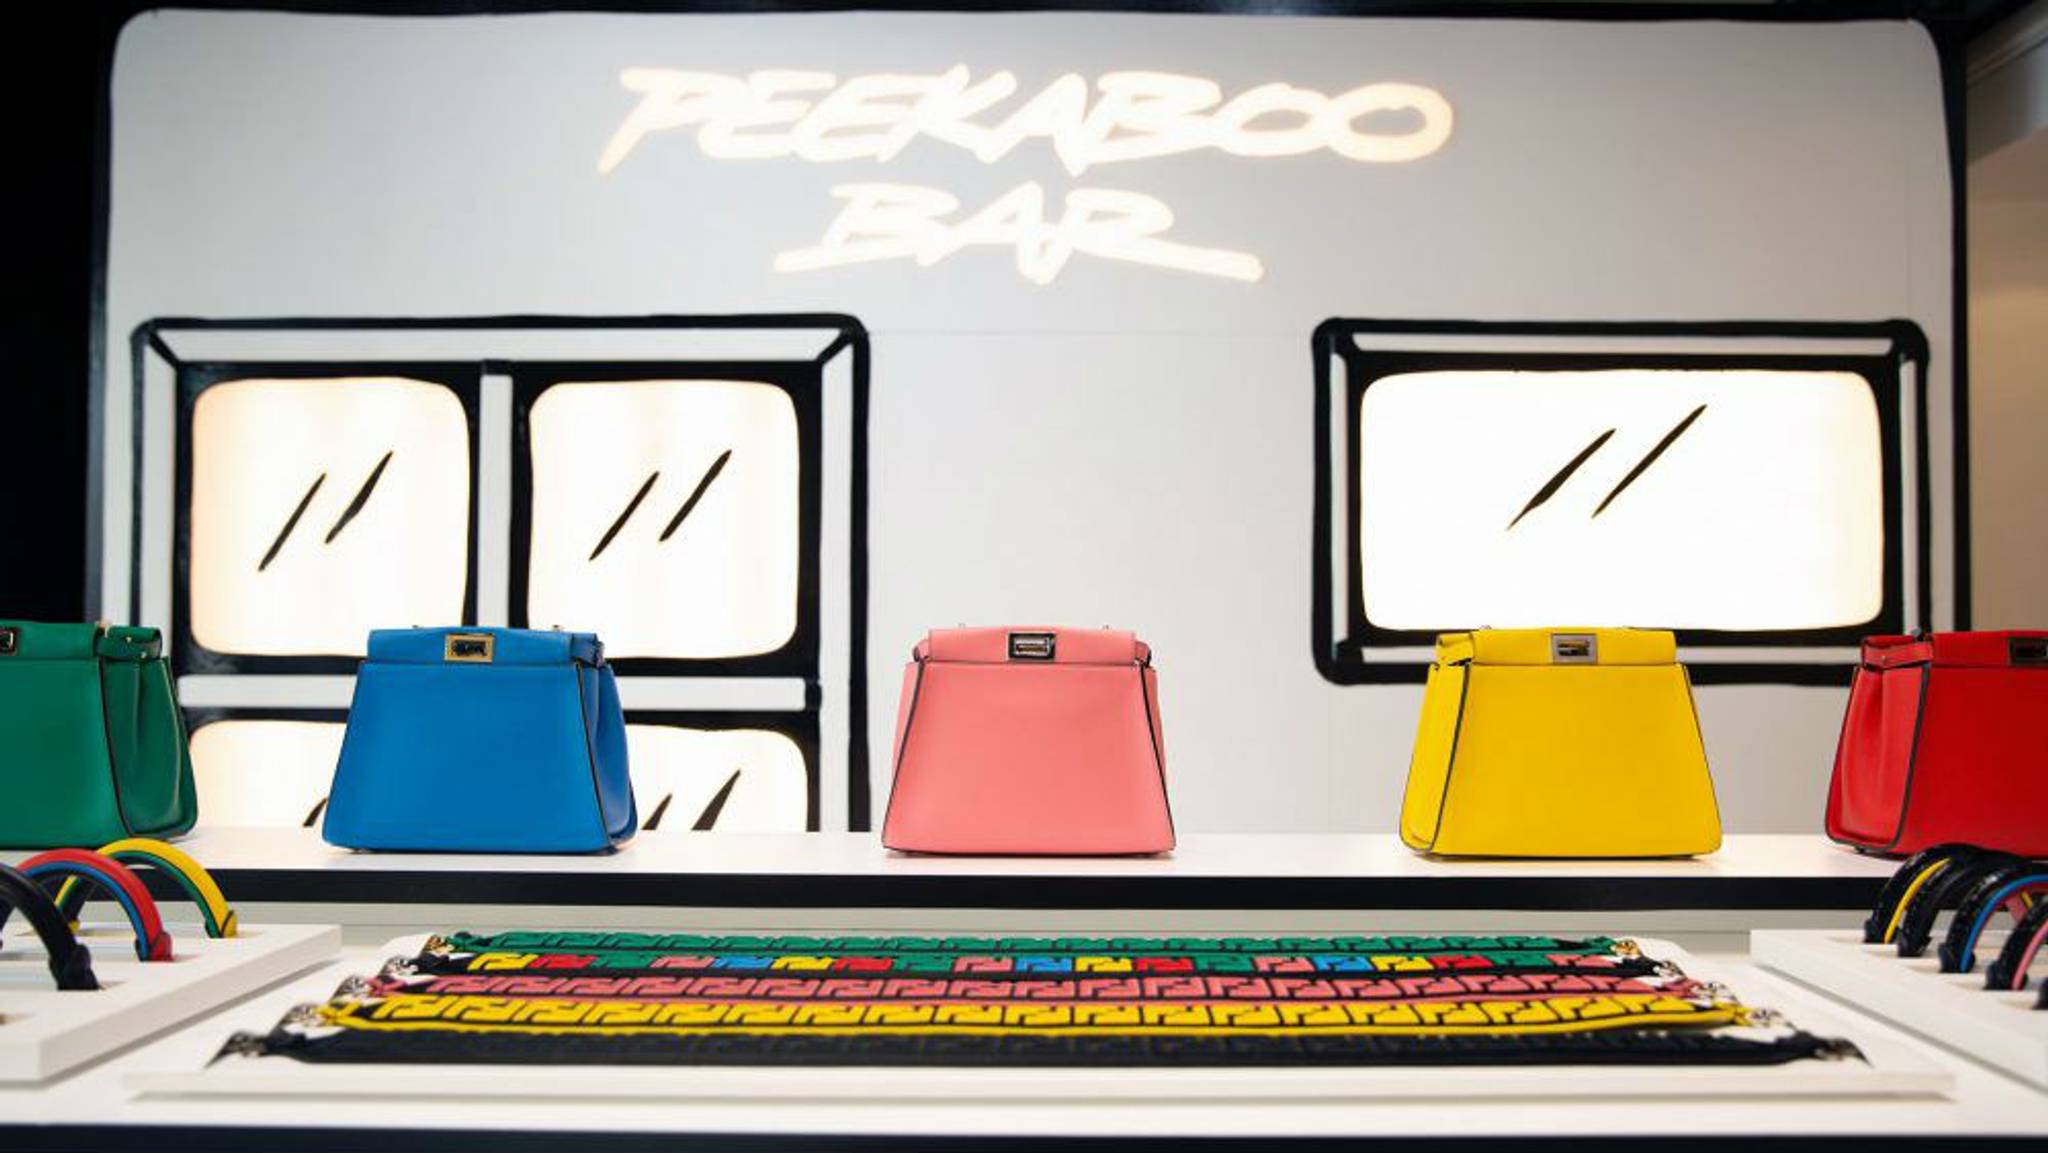 Fendi Caffe entices shoppers with experiential luxury